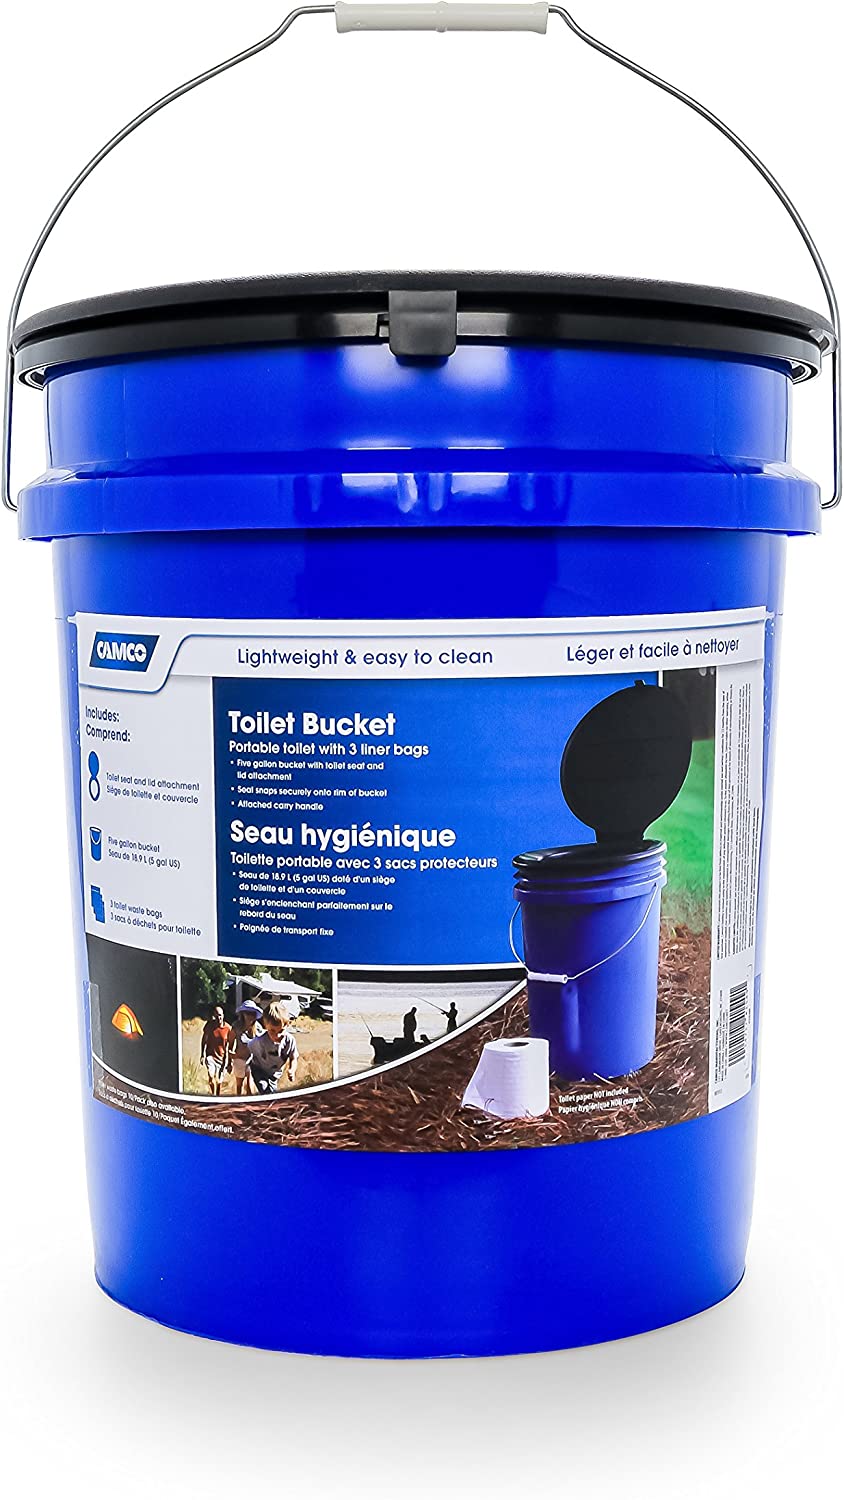 Camco Portable Toilet Bucket | Features 3 Bag Liners [...]